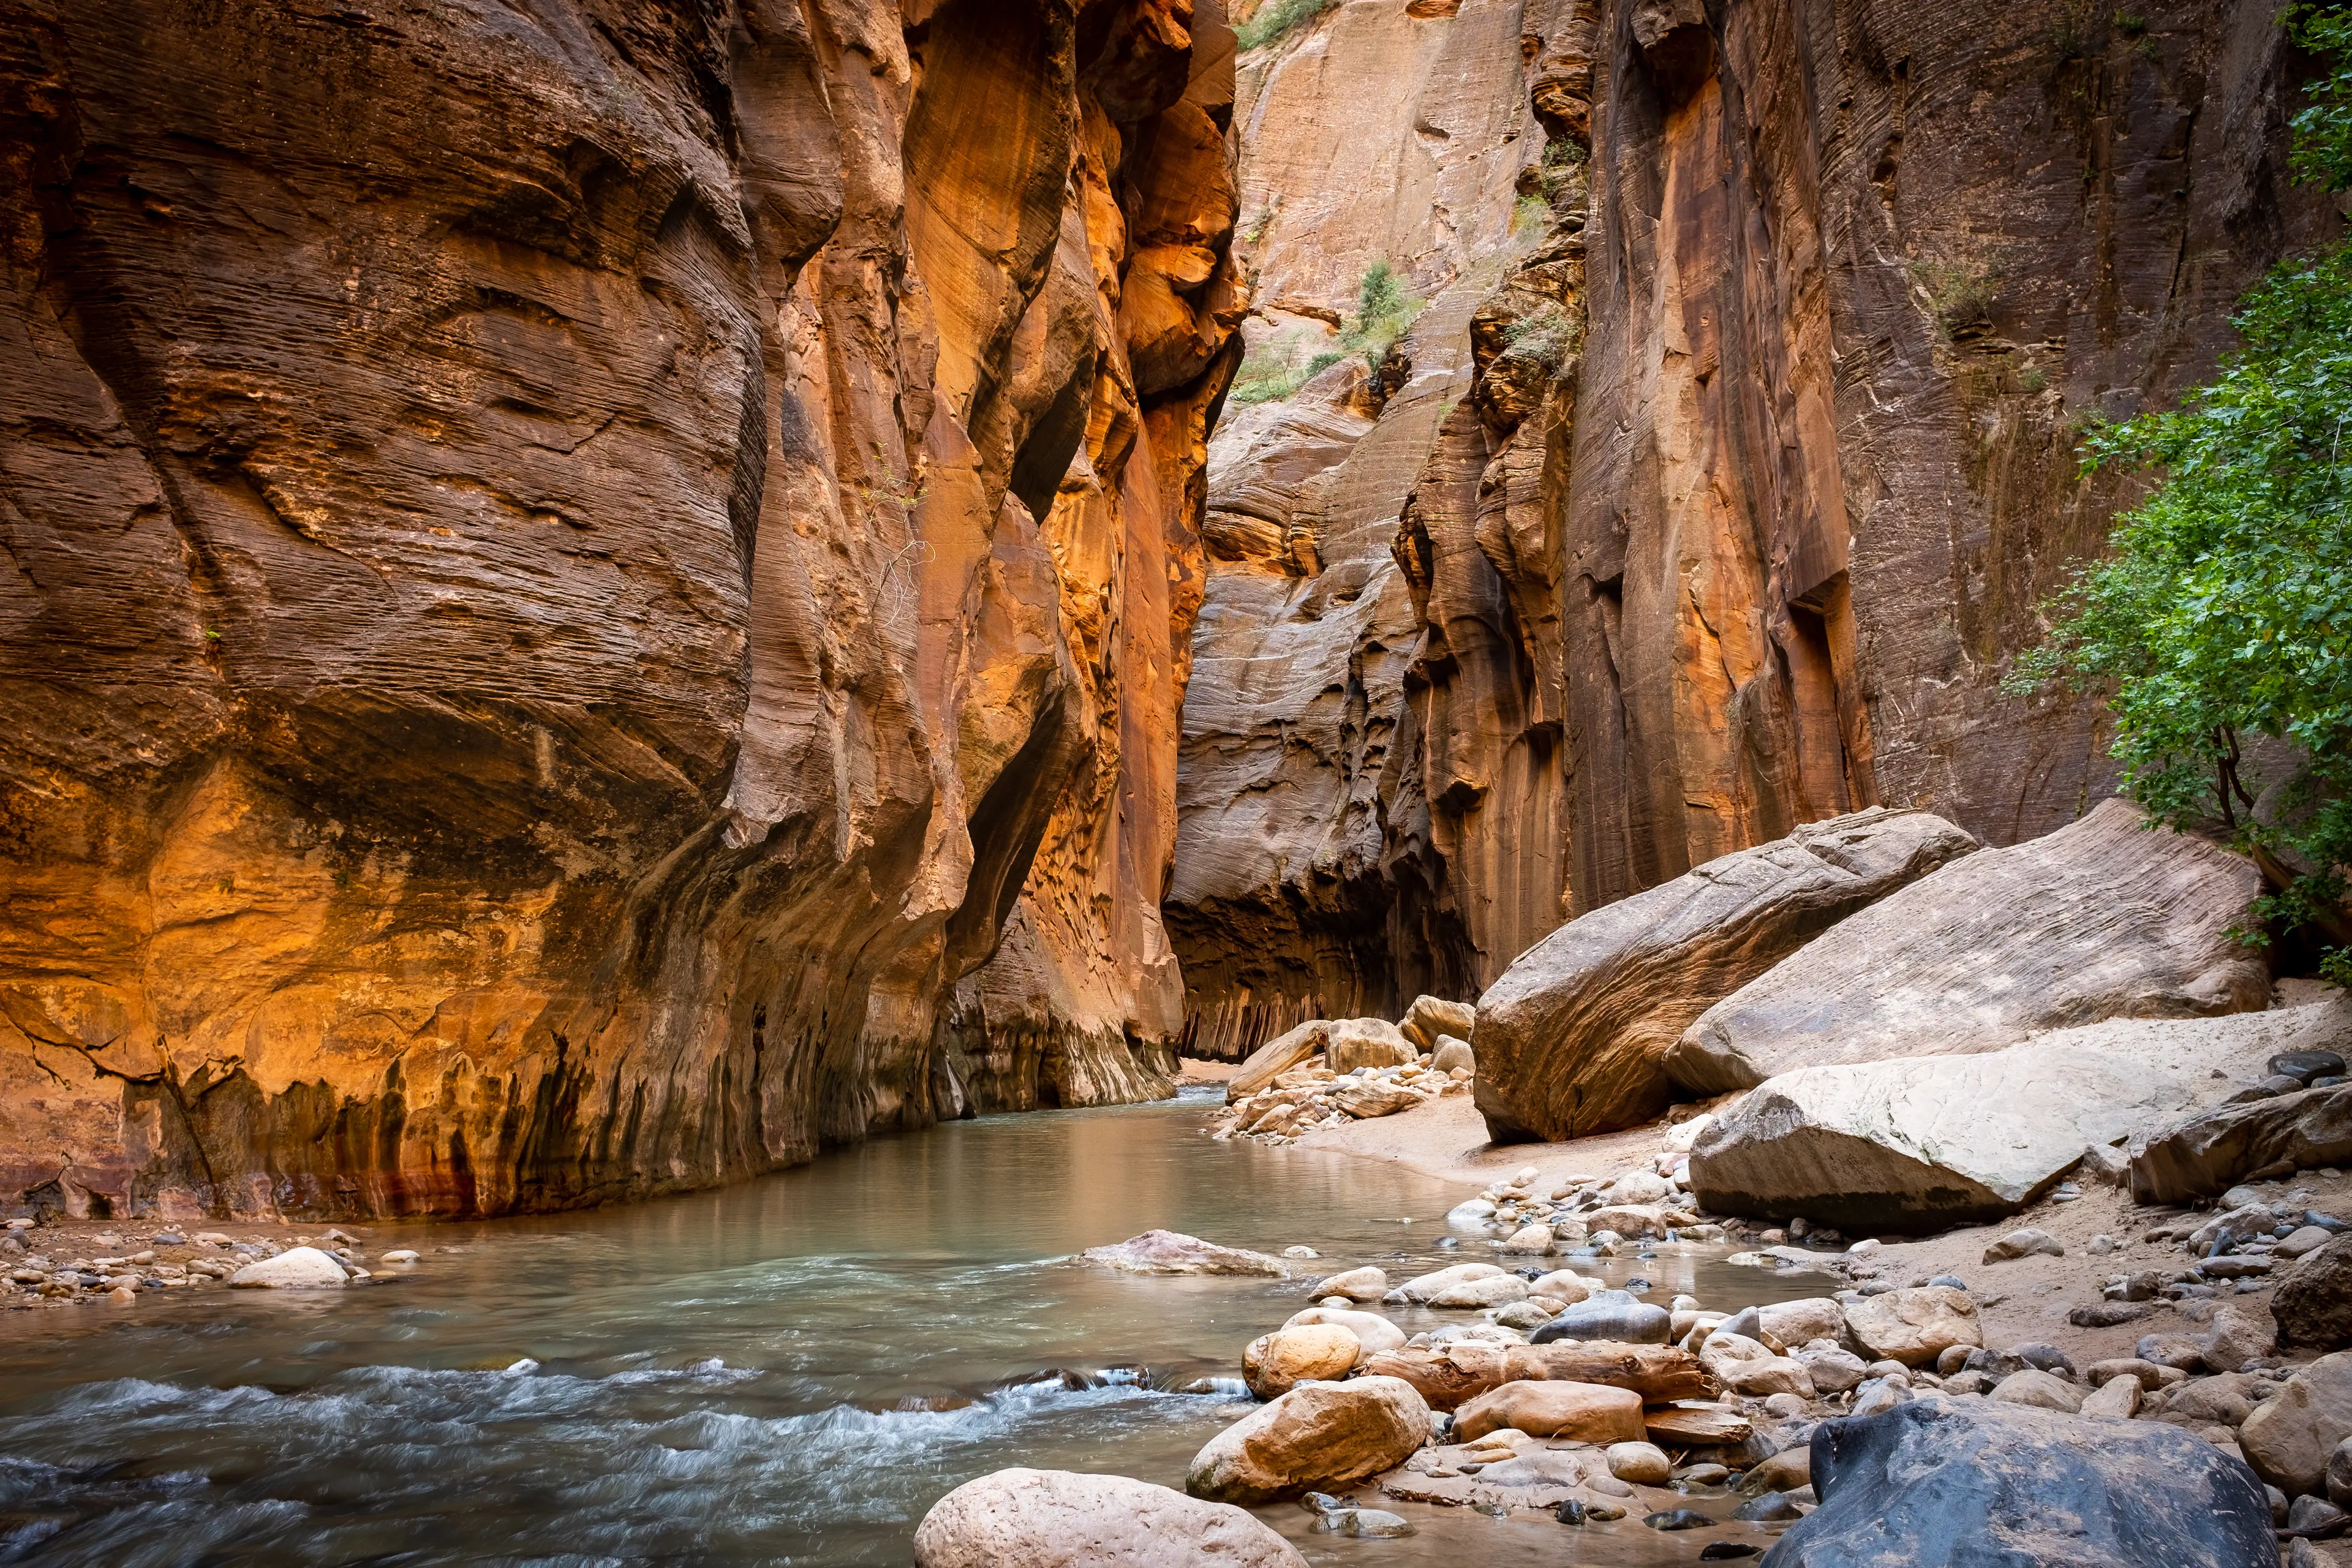 3-Day Outdoor Adventure and Sightseeing in Zion National Park, Utah